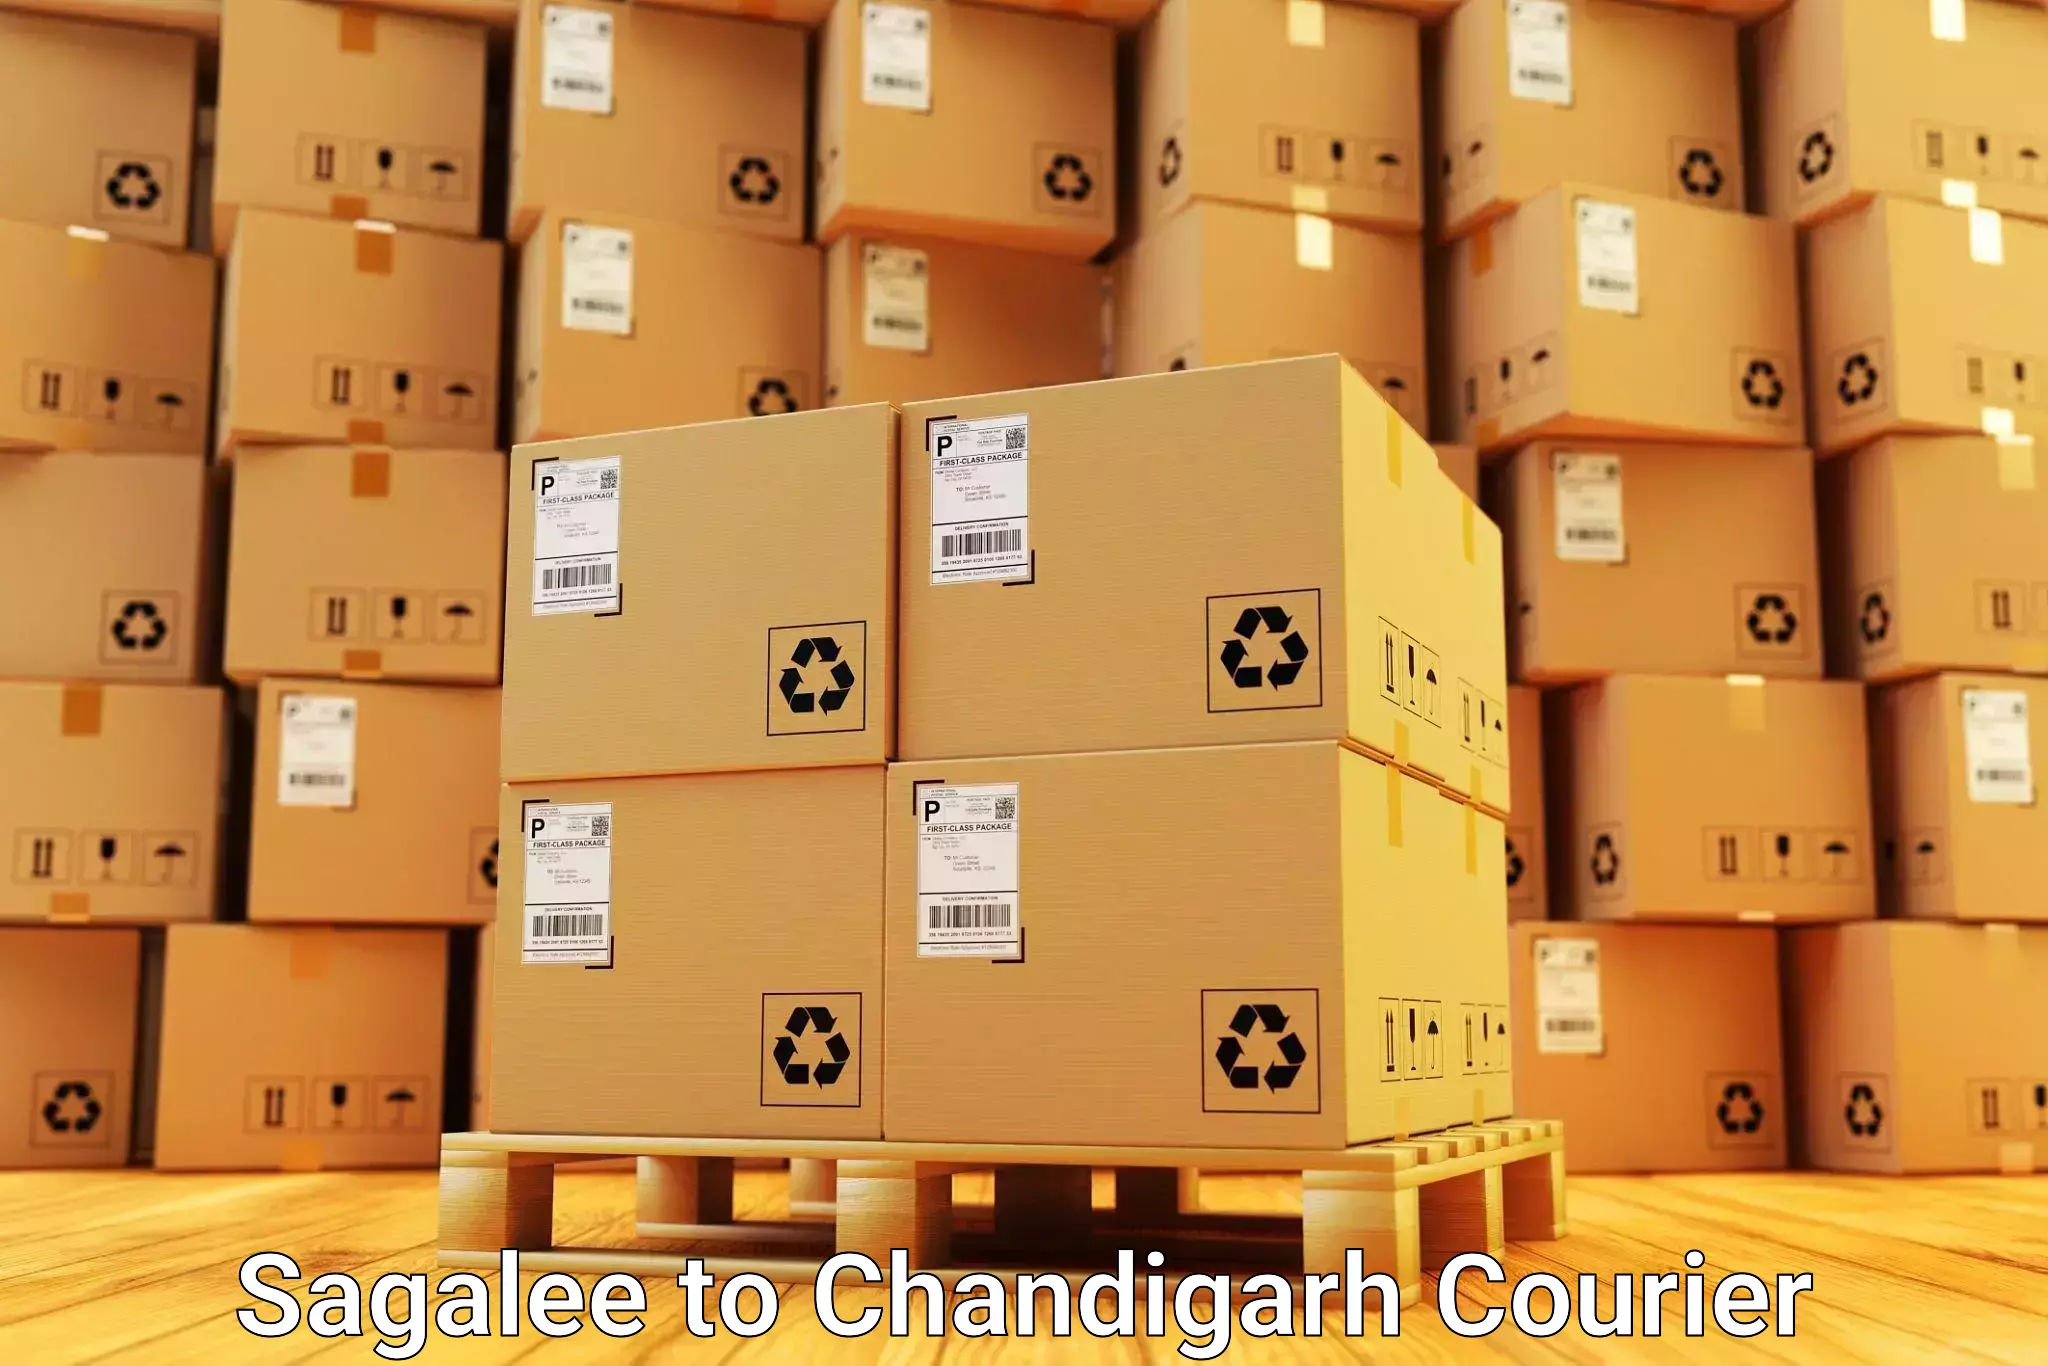 Furniture moving specialists Sagalee to Panjab University Chandigarh